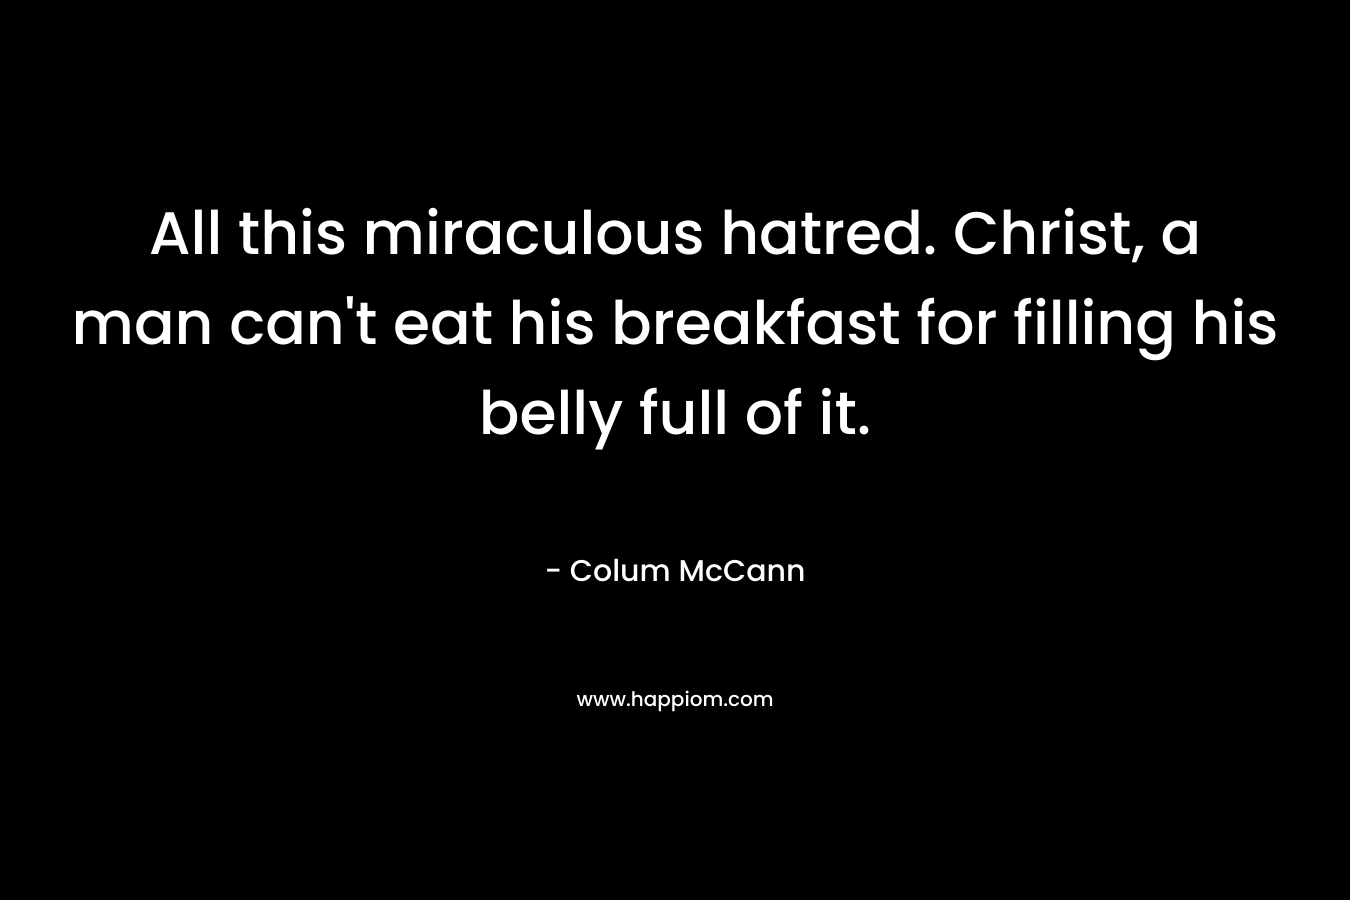 All this miraculous hatred. Christ, a man can’t eat his breakfast for filling his belly full of it. – Colum McCann